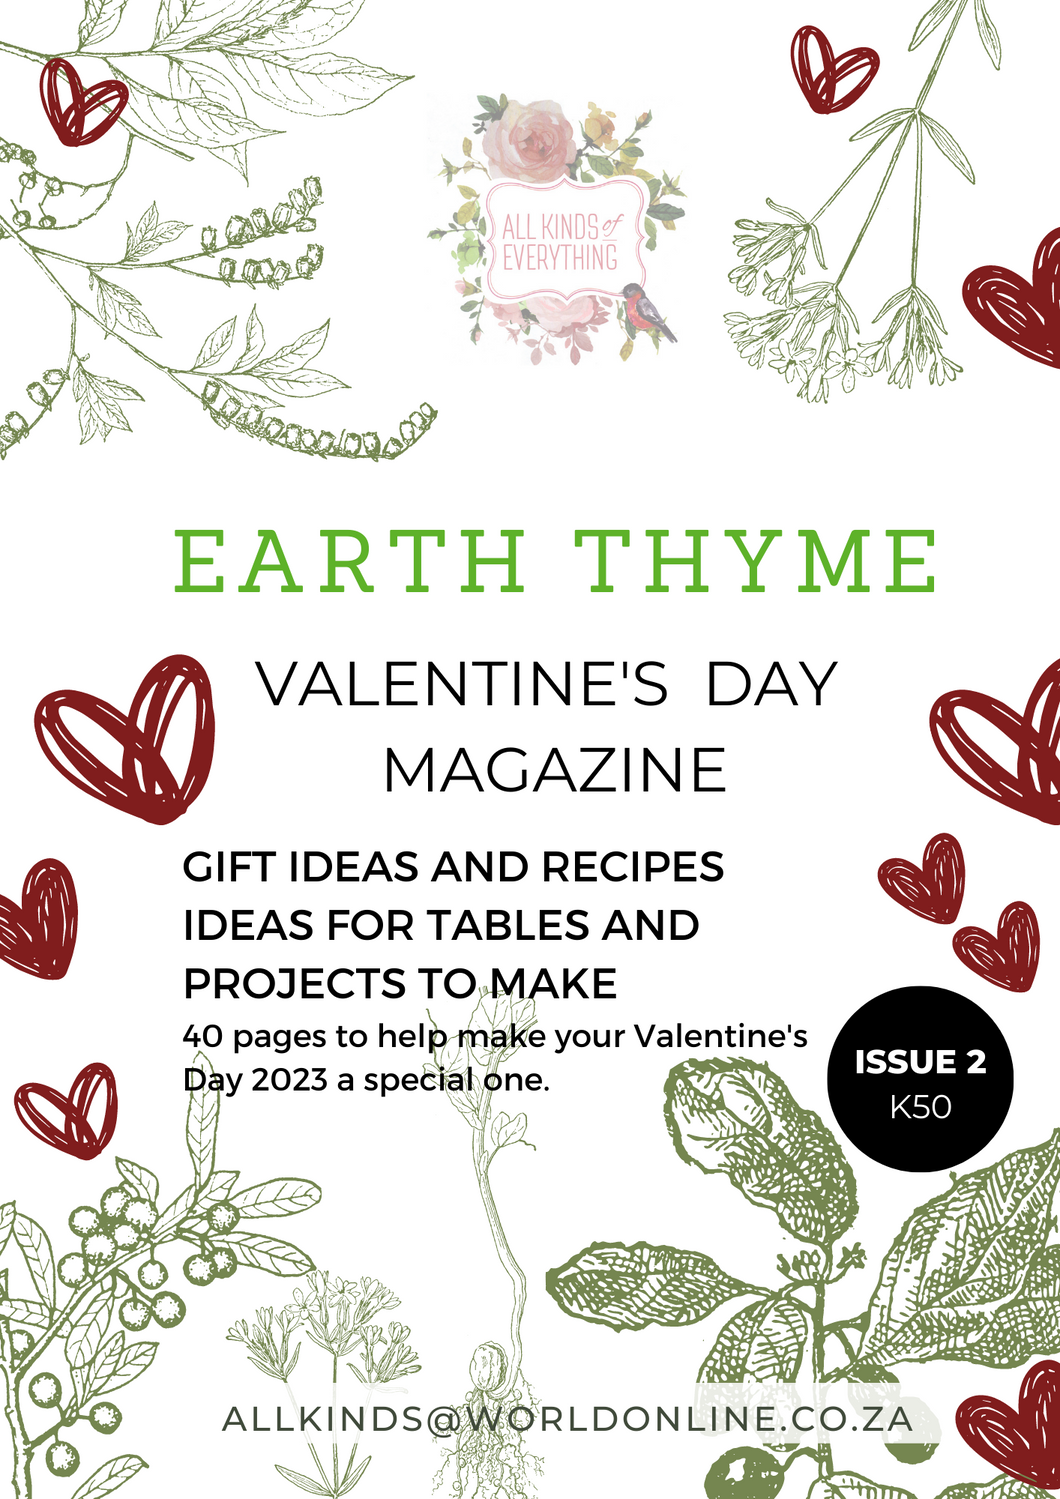 EARTH THYME MAGAZINE ISSUE 2  Valentine Edition